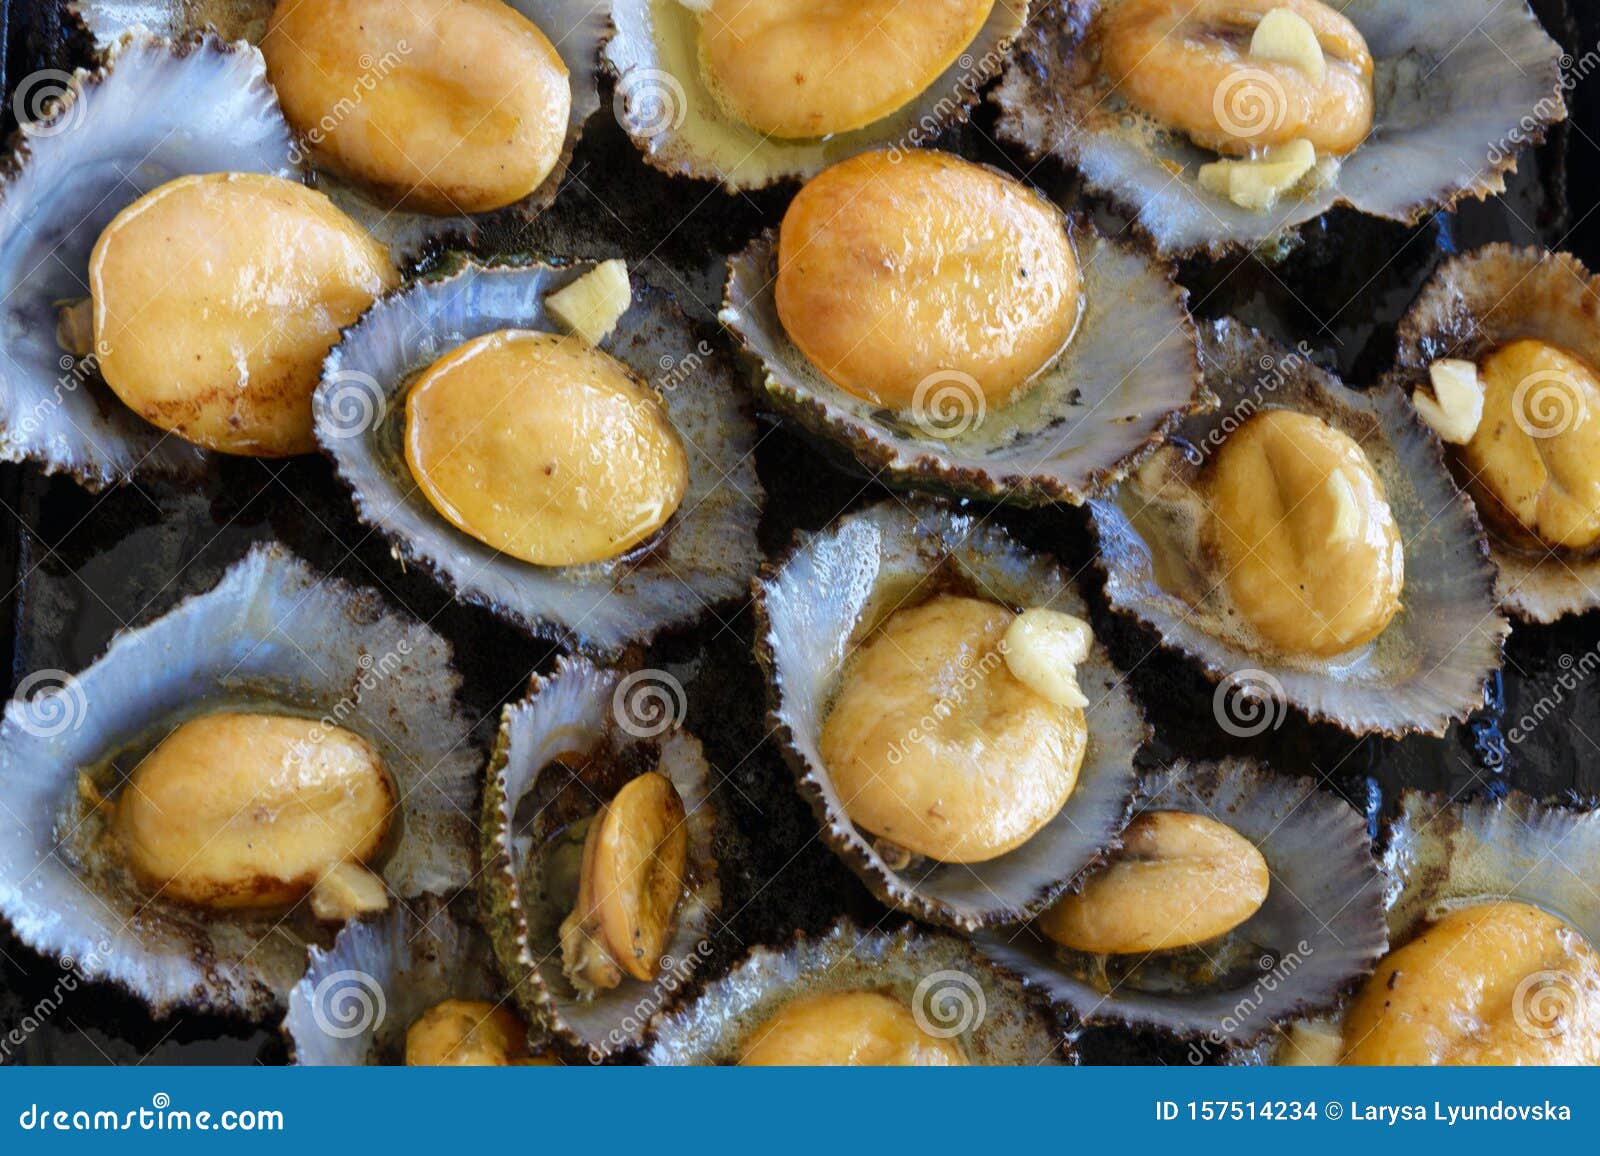 cuisine of the azores. shellfish lapas, lipets are popular as snacks in the azores.